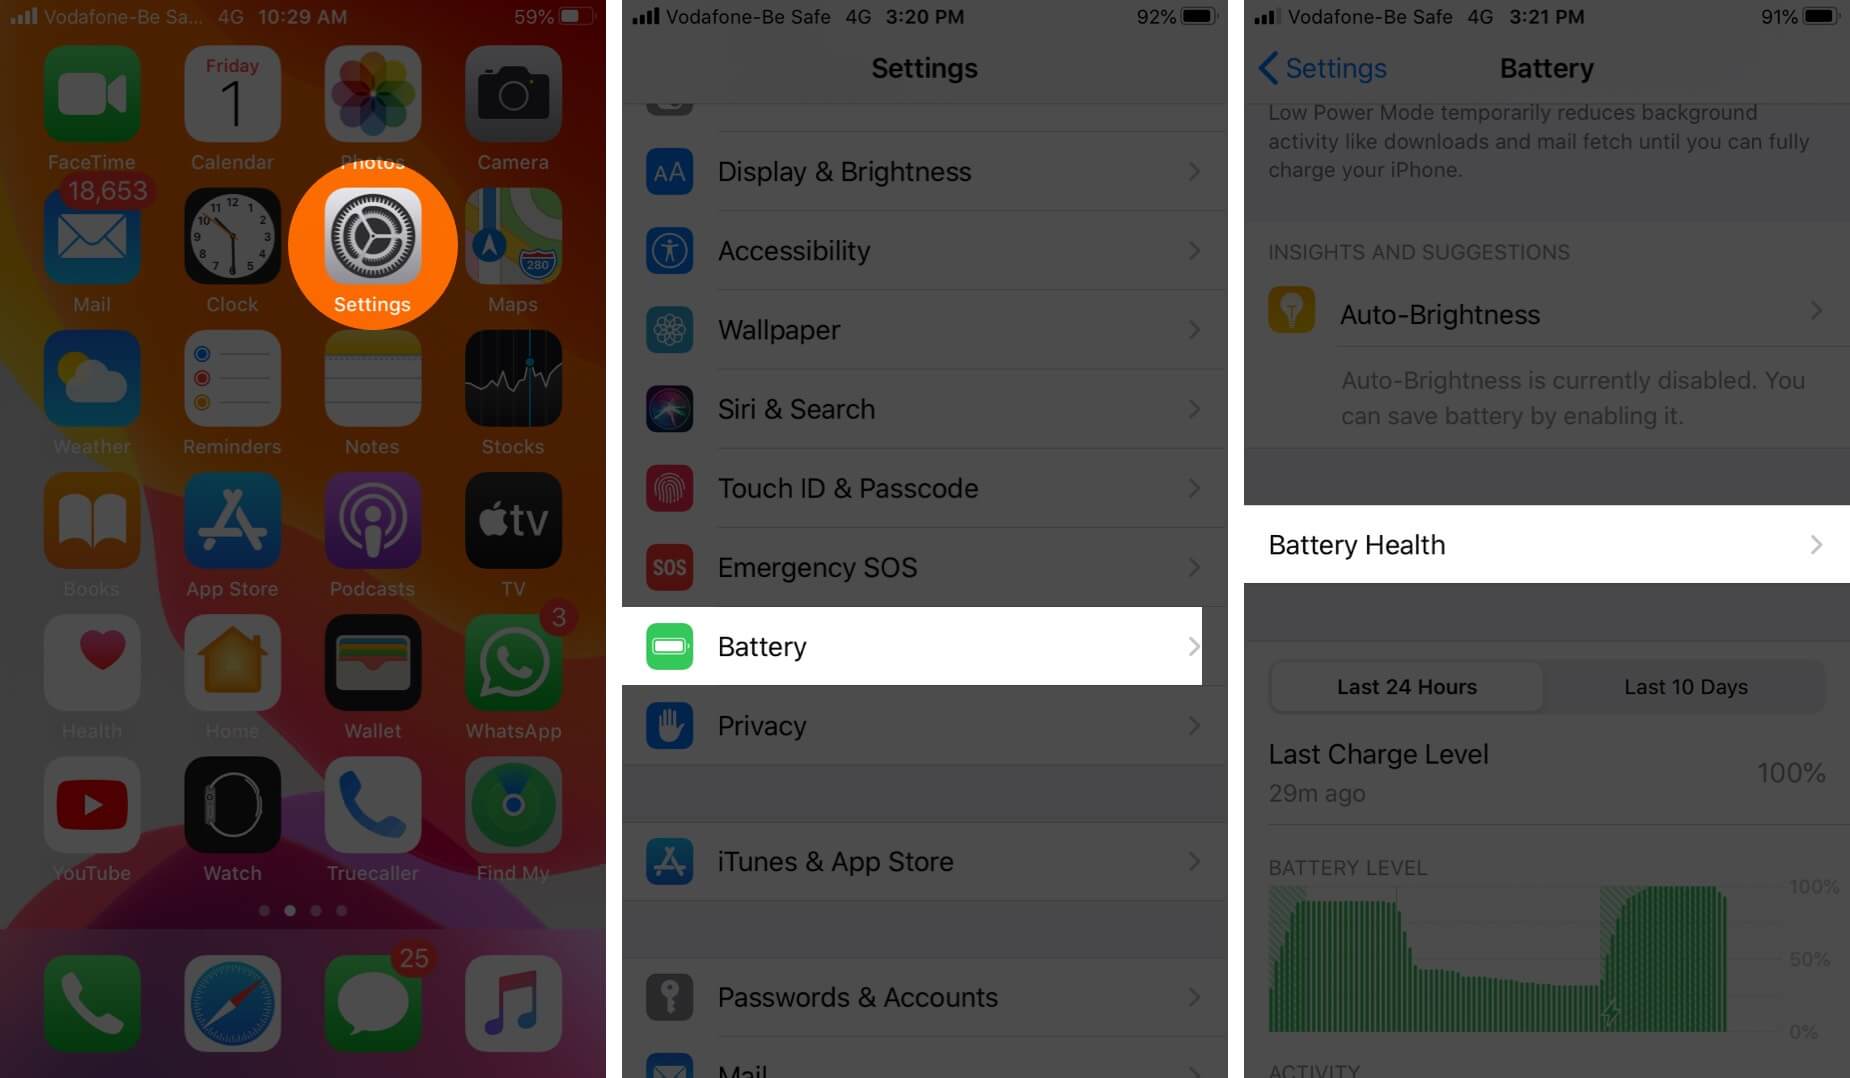 Open Settings Tap on Battery and Then Tap on Battery Health